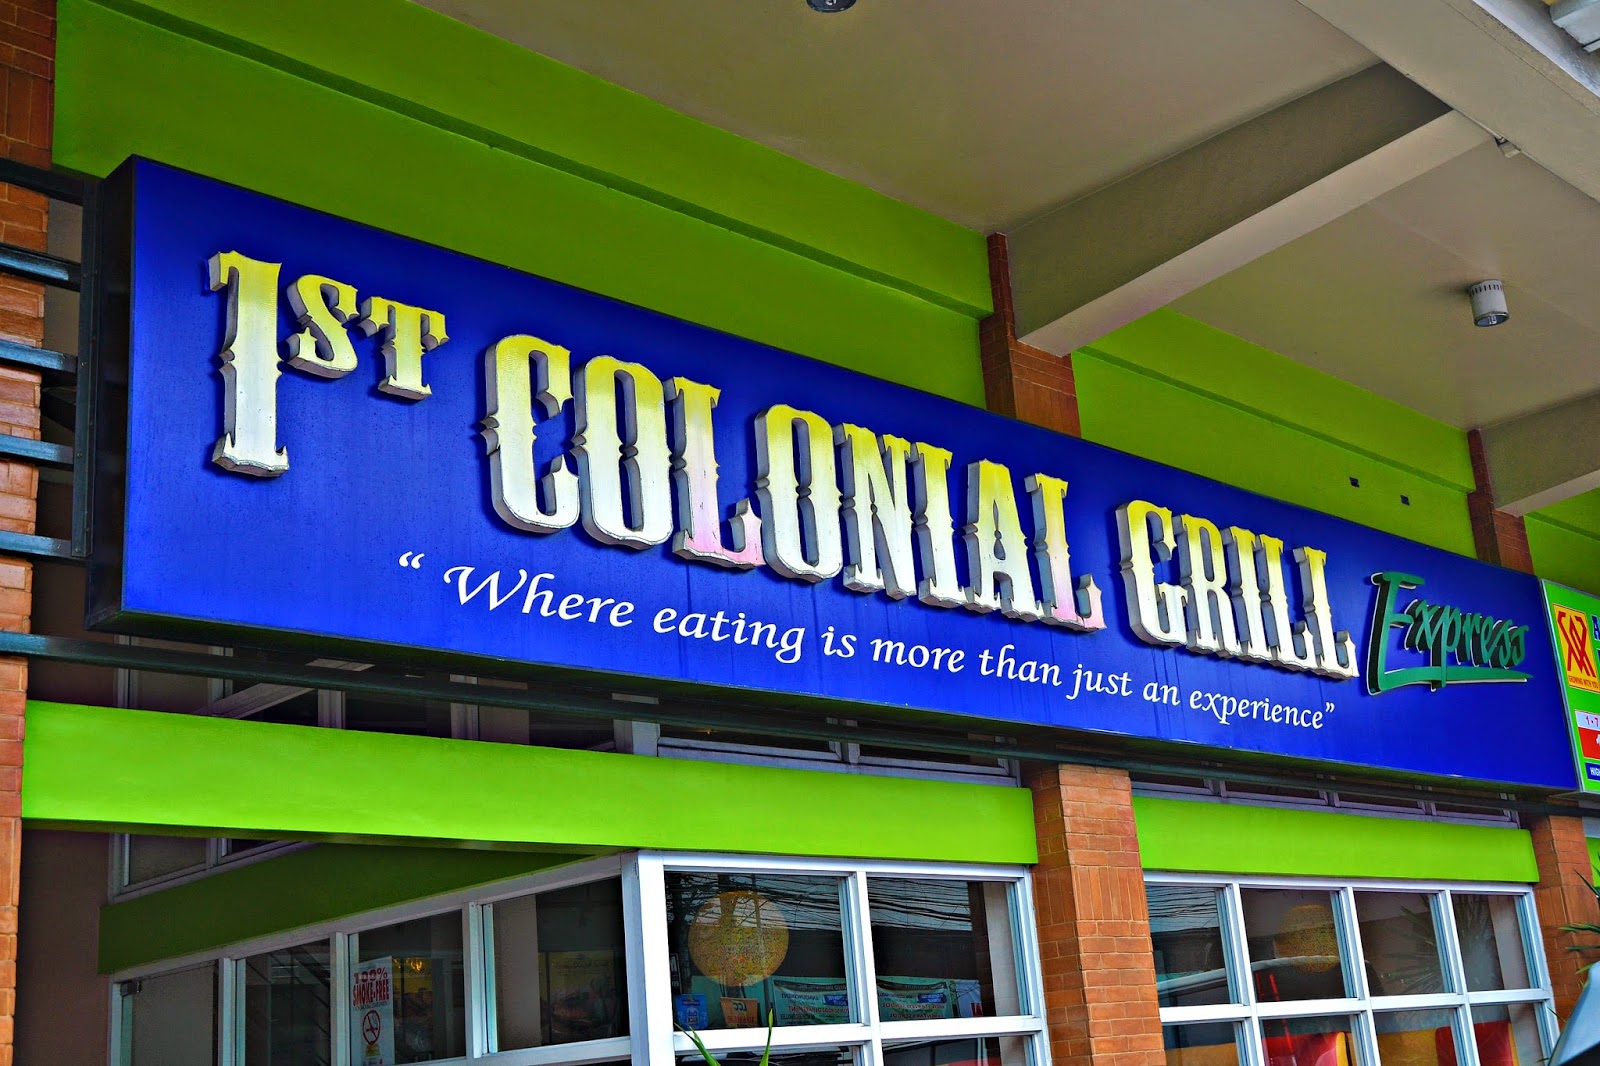 Food Trip: 1st Colonial Grill